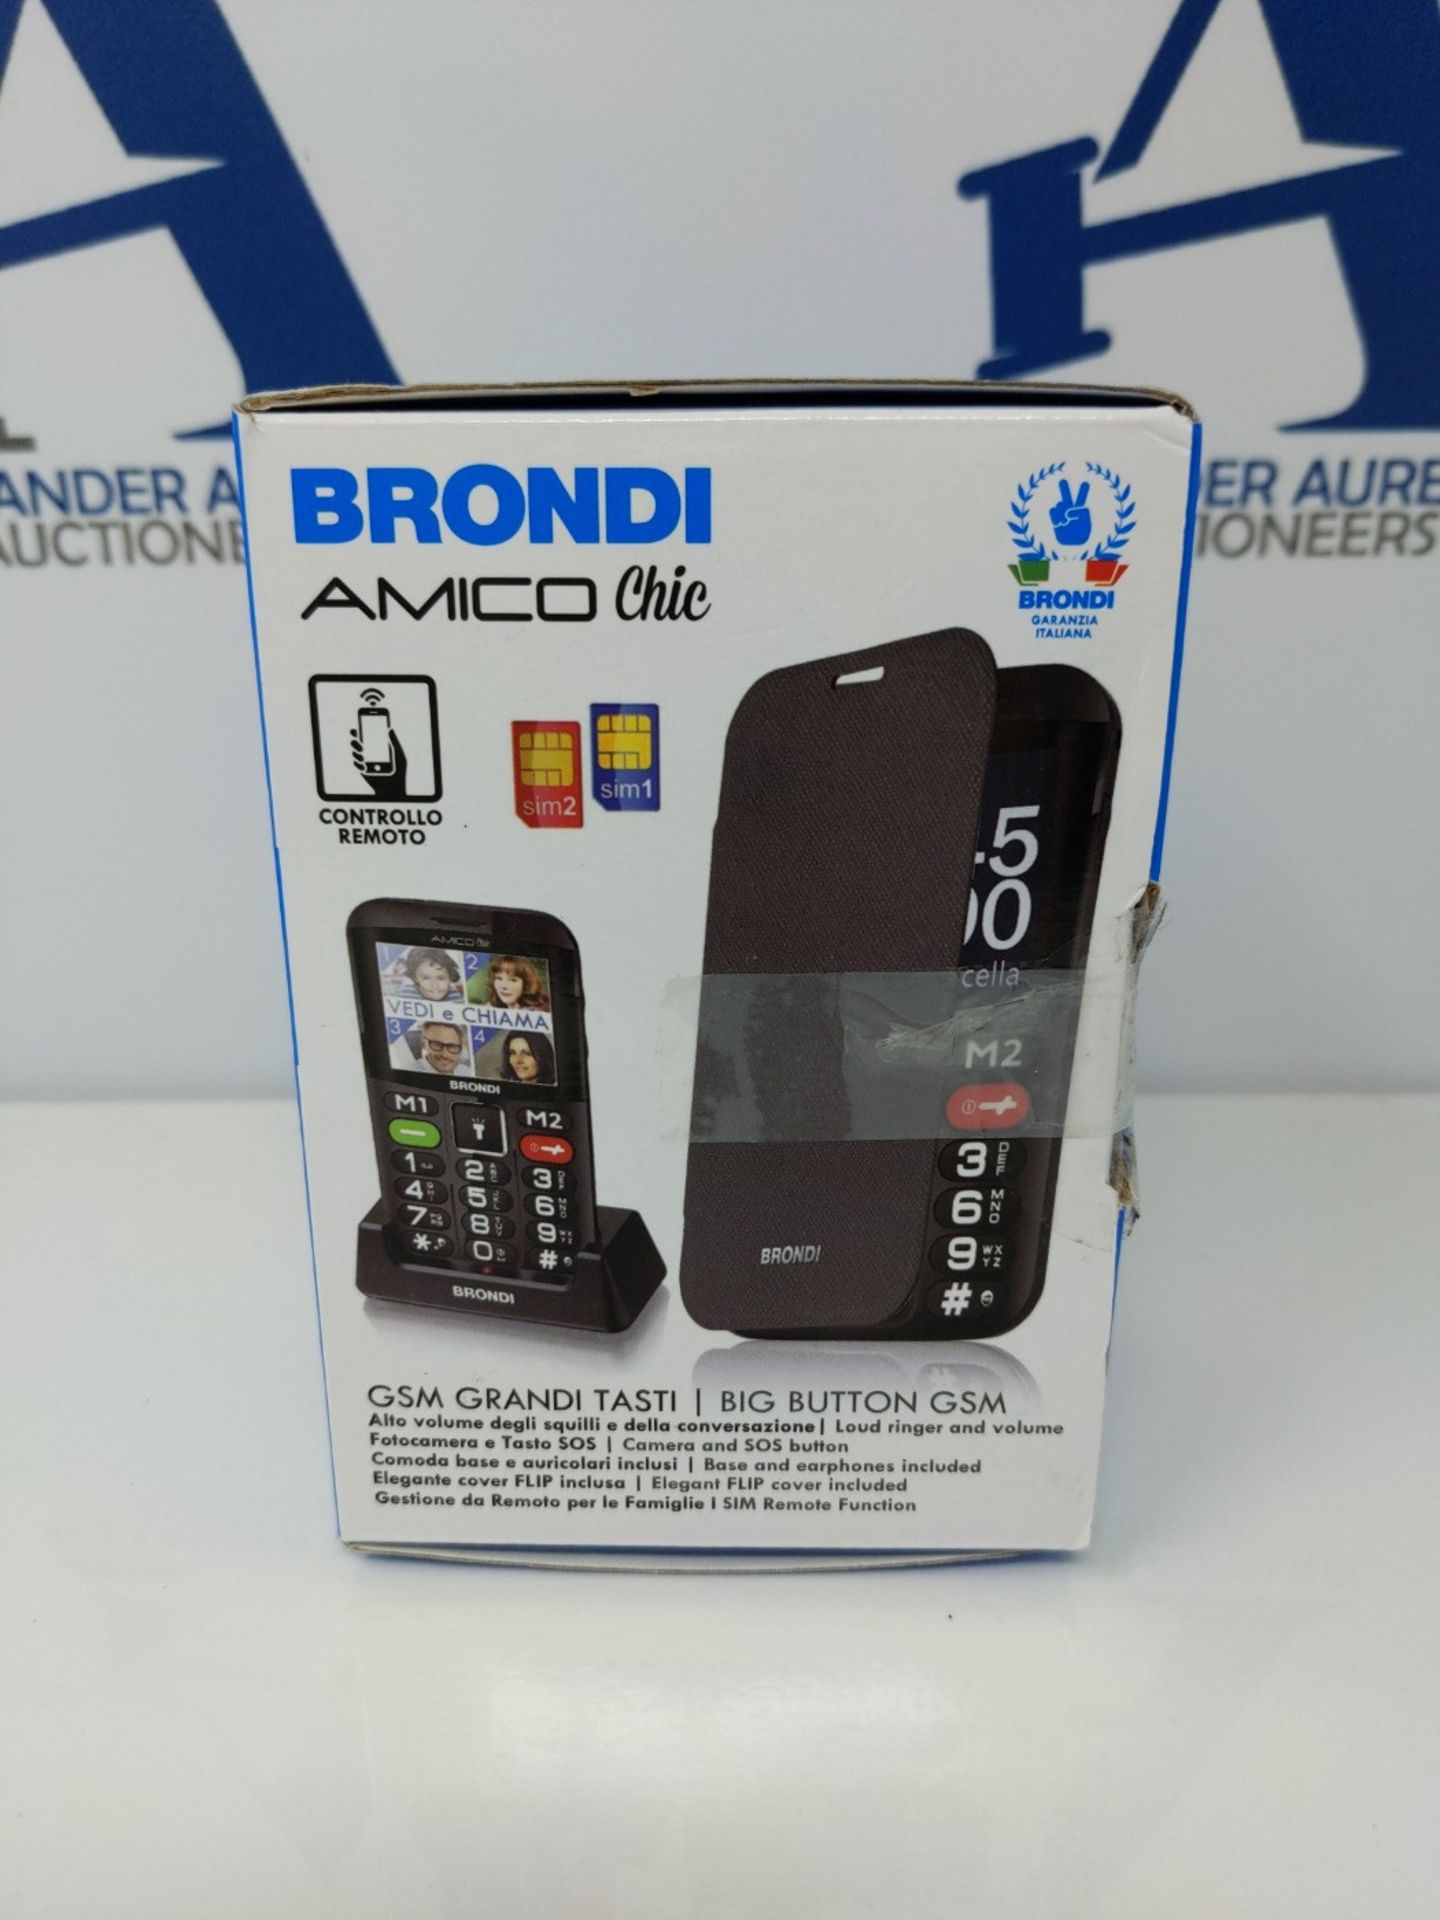 Cellular Brondi Amico Chic with case incl. - Image 2 of 3